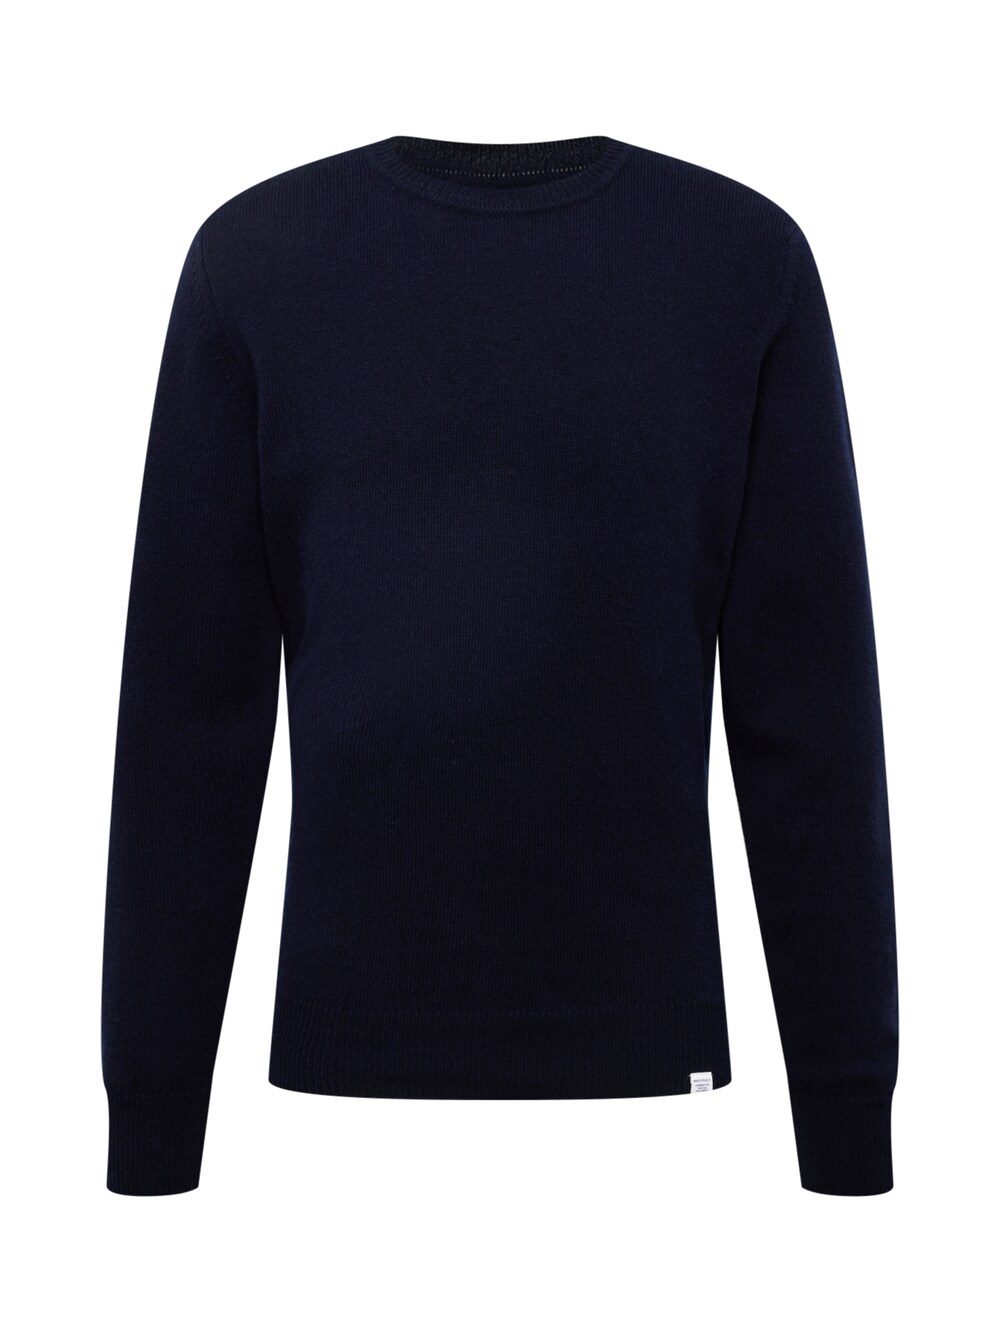 Свитер NORSE PROJECTS Sigfred, темно-синий джемпер norse projects sigfred lambswool knit серый